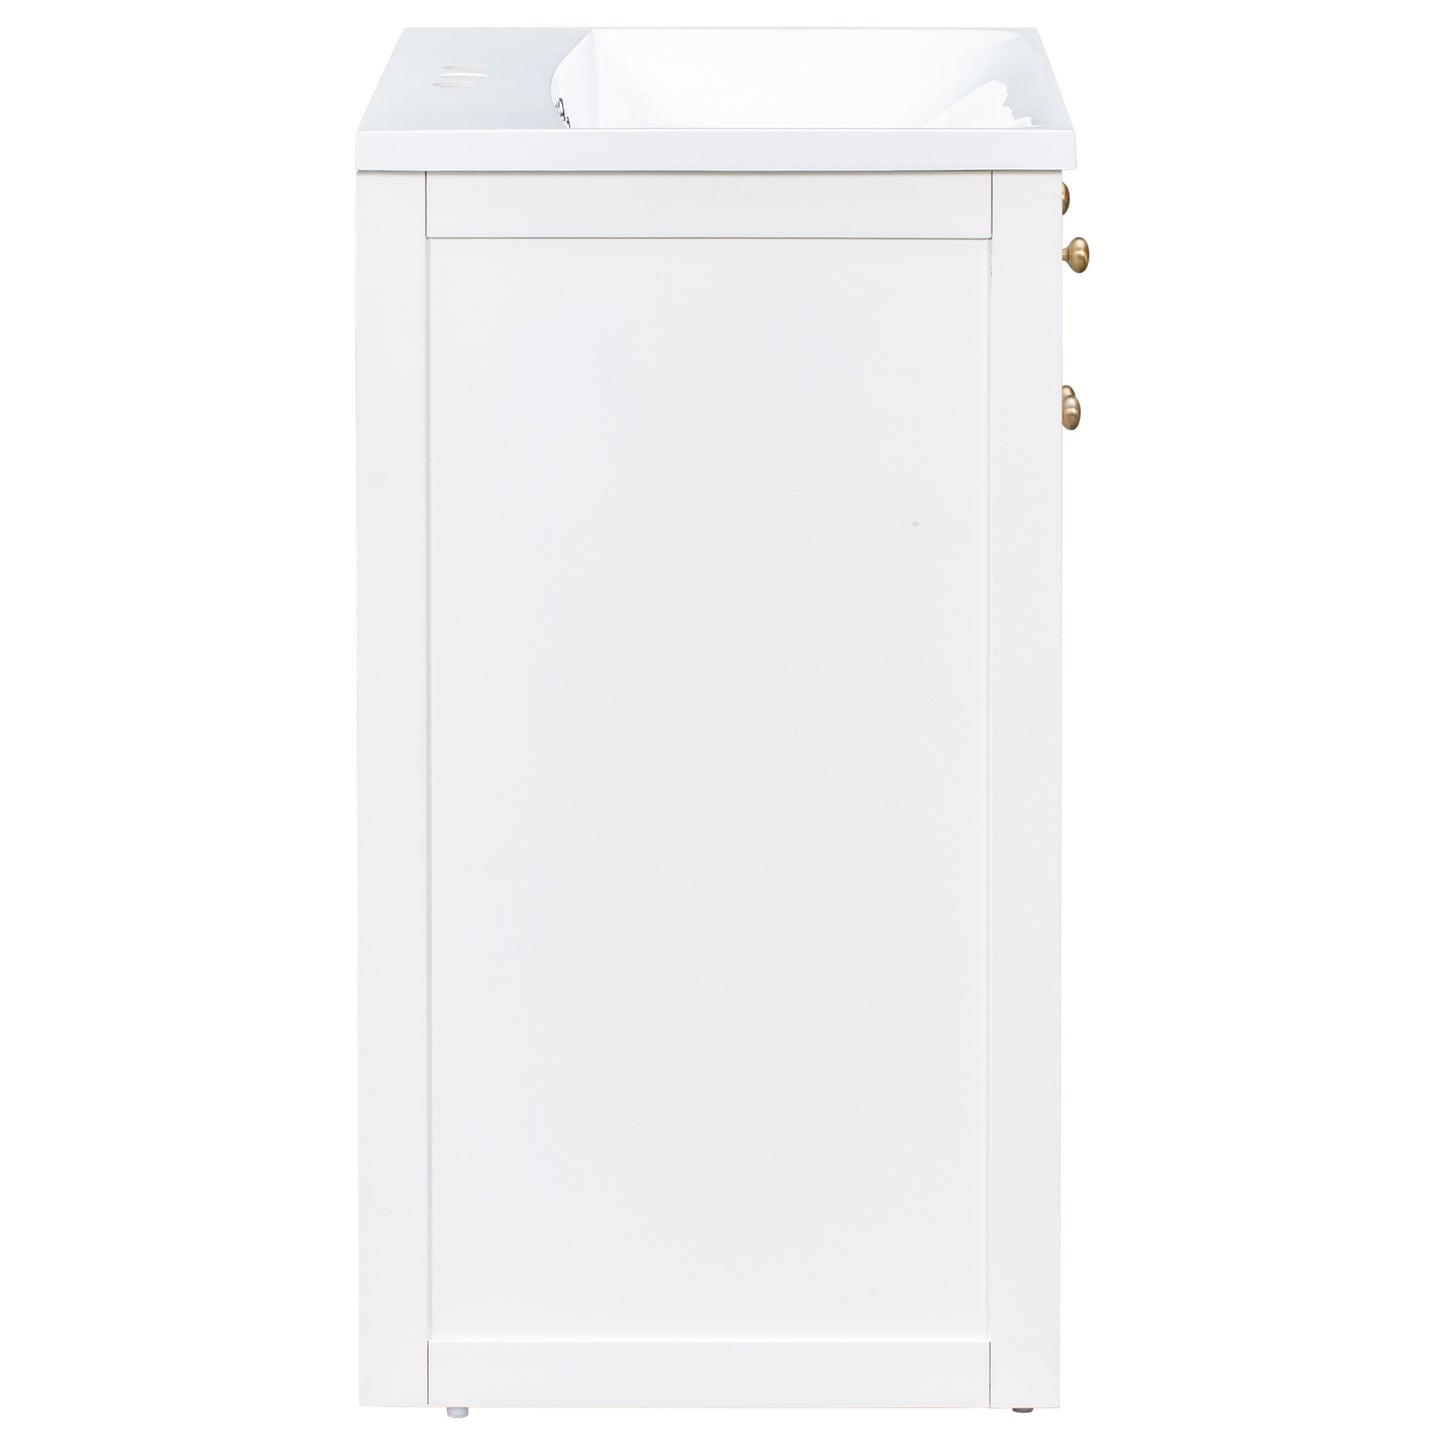 24" Bathroom vanity with Single Sink; White Combo Cabinet Undermount Sink; Bathroom Storage Cabinet; Solid Wood Frame; Pull-out footrest